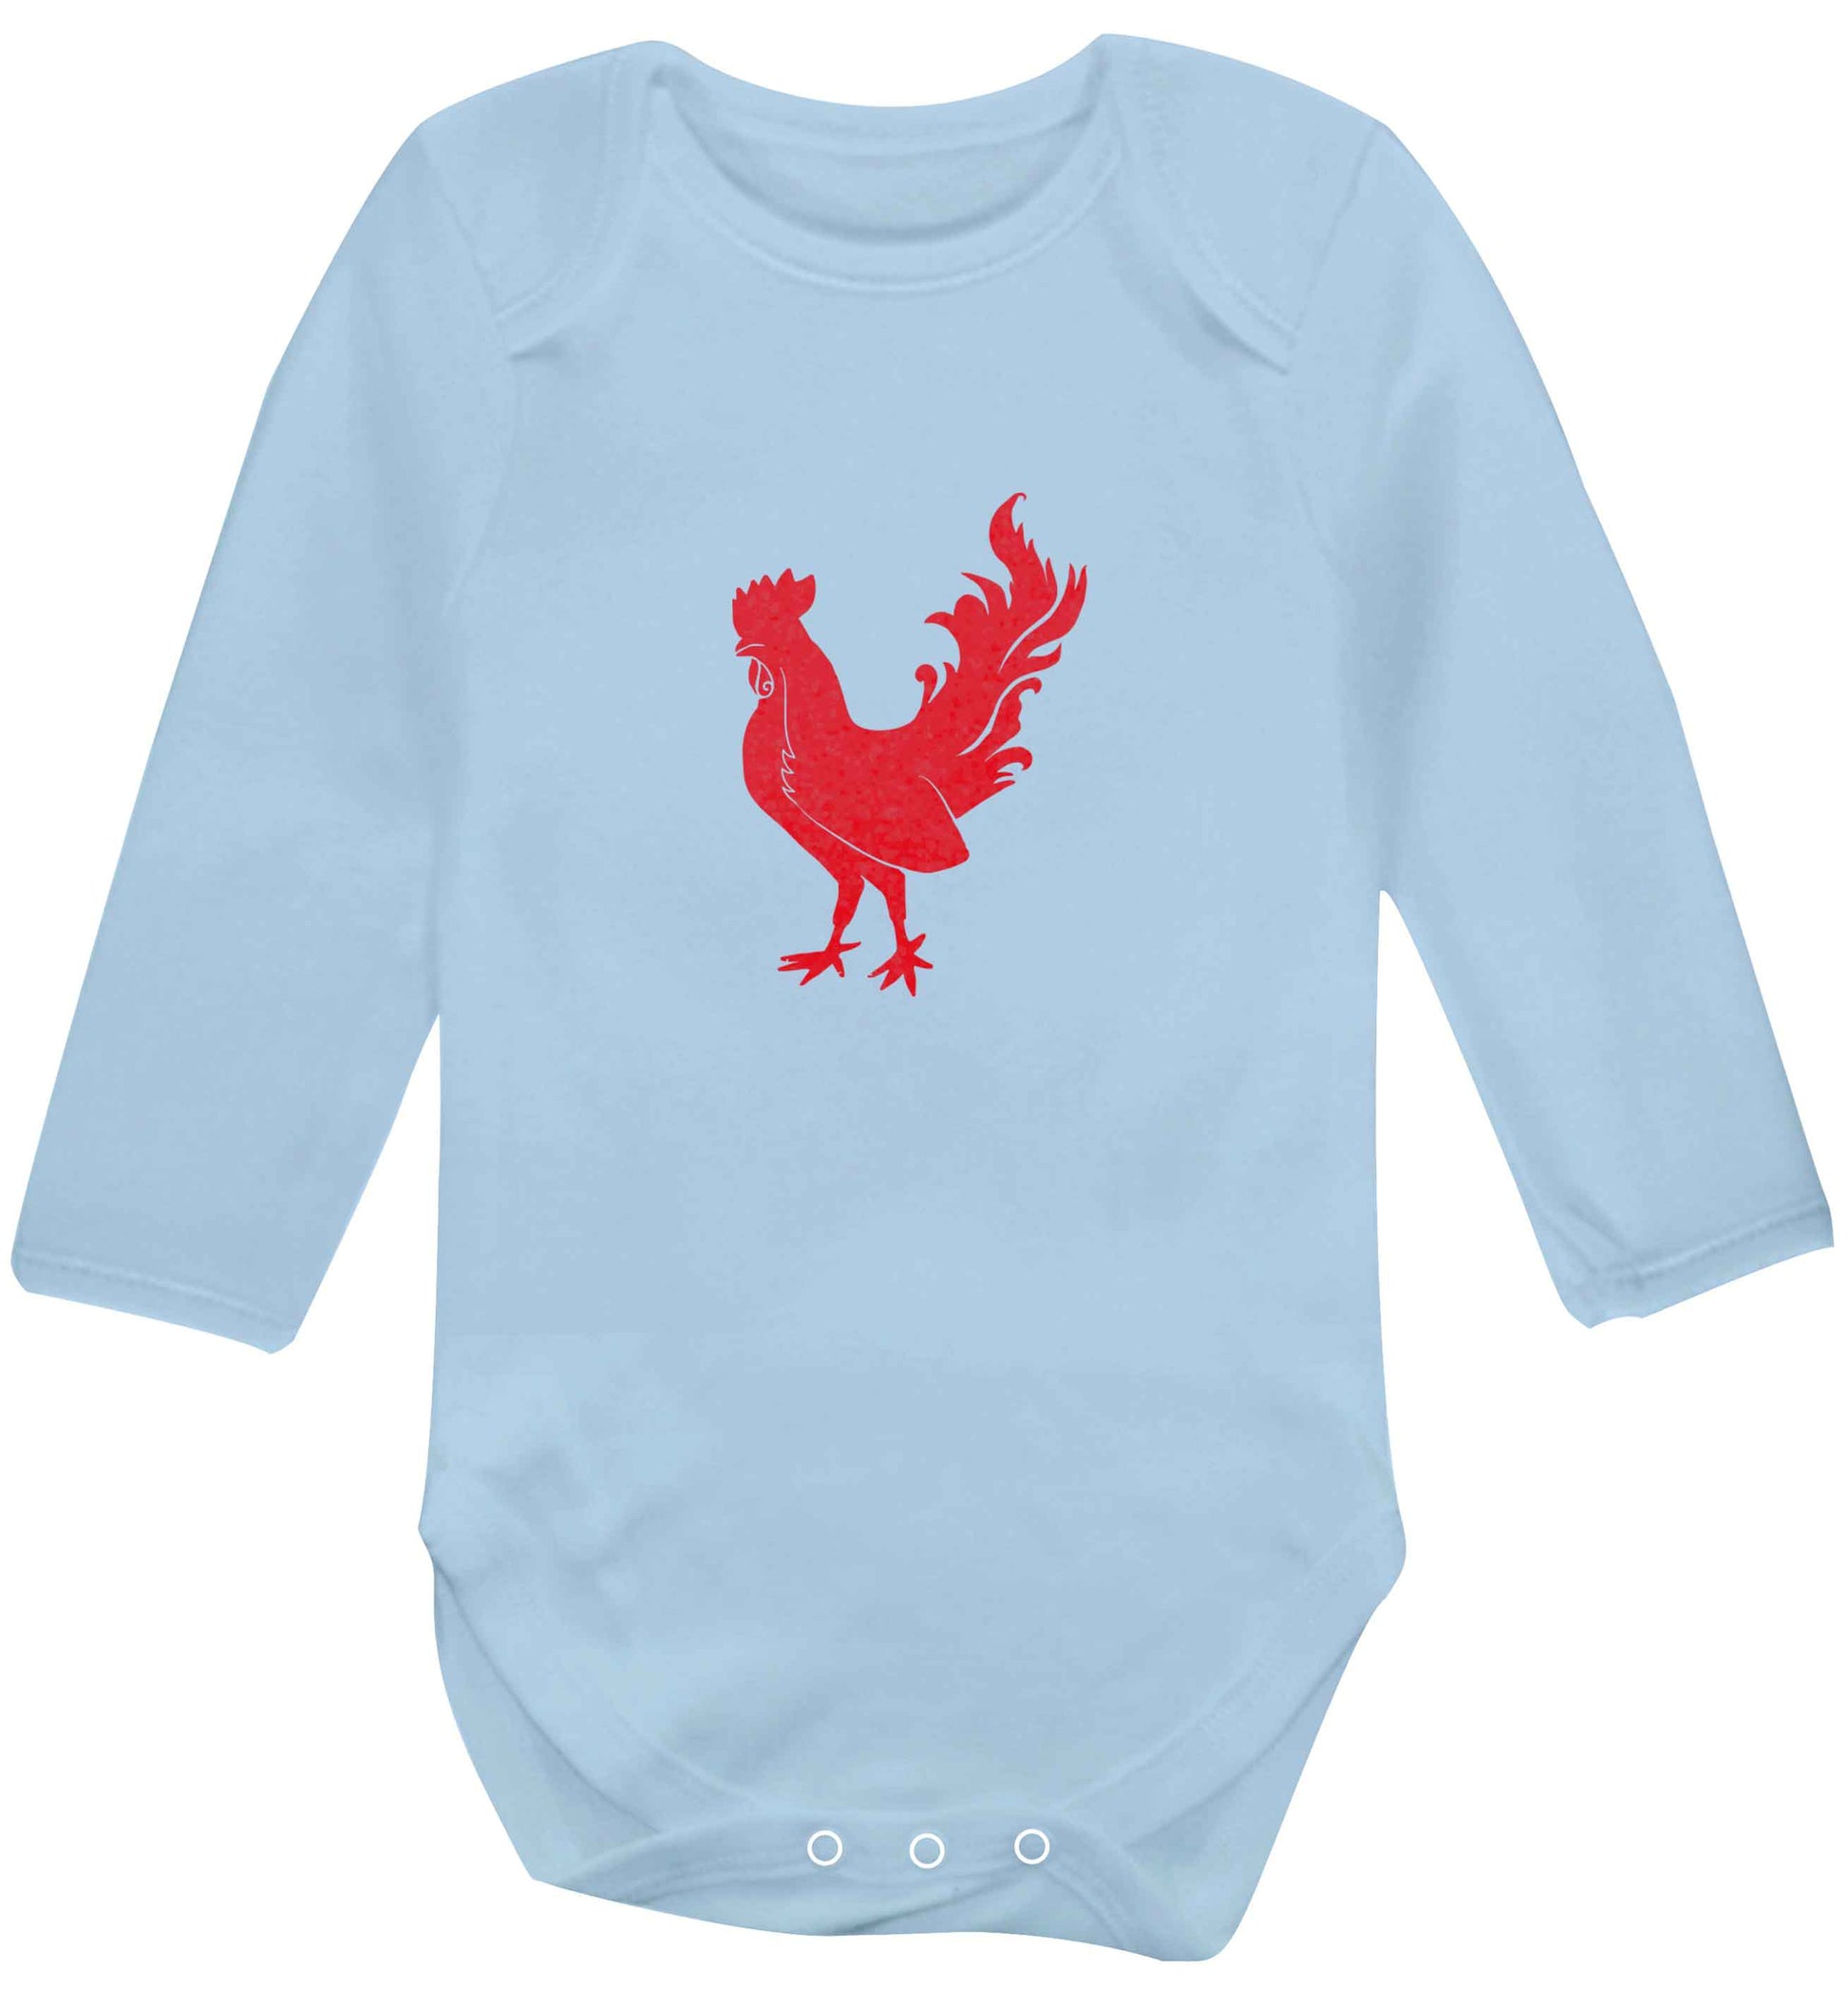 Rooster baby vest long sleeved pale blue 6-12 months